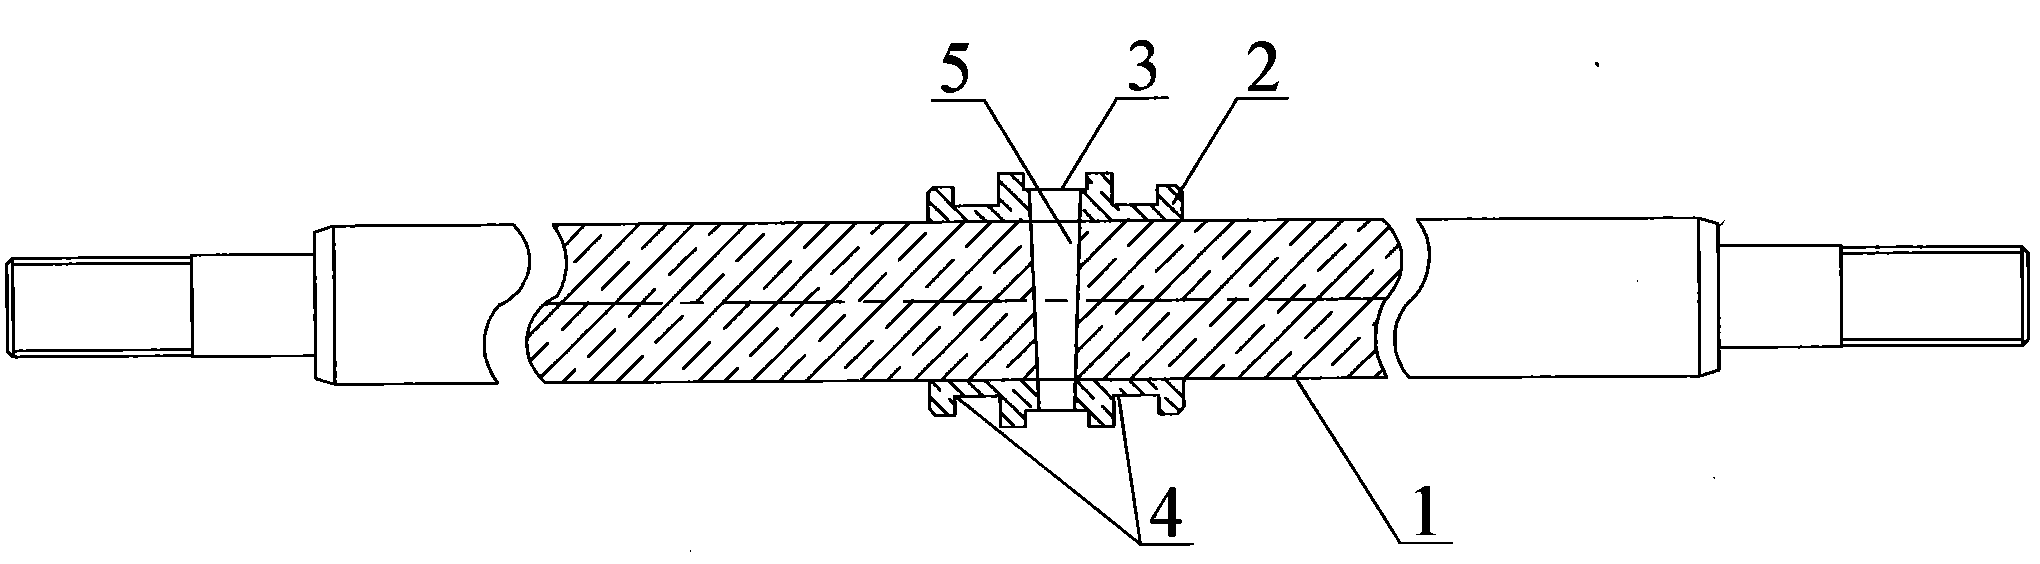 Connecting structure and installation method for piston and piston rod